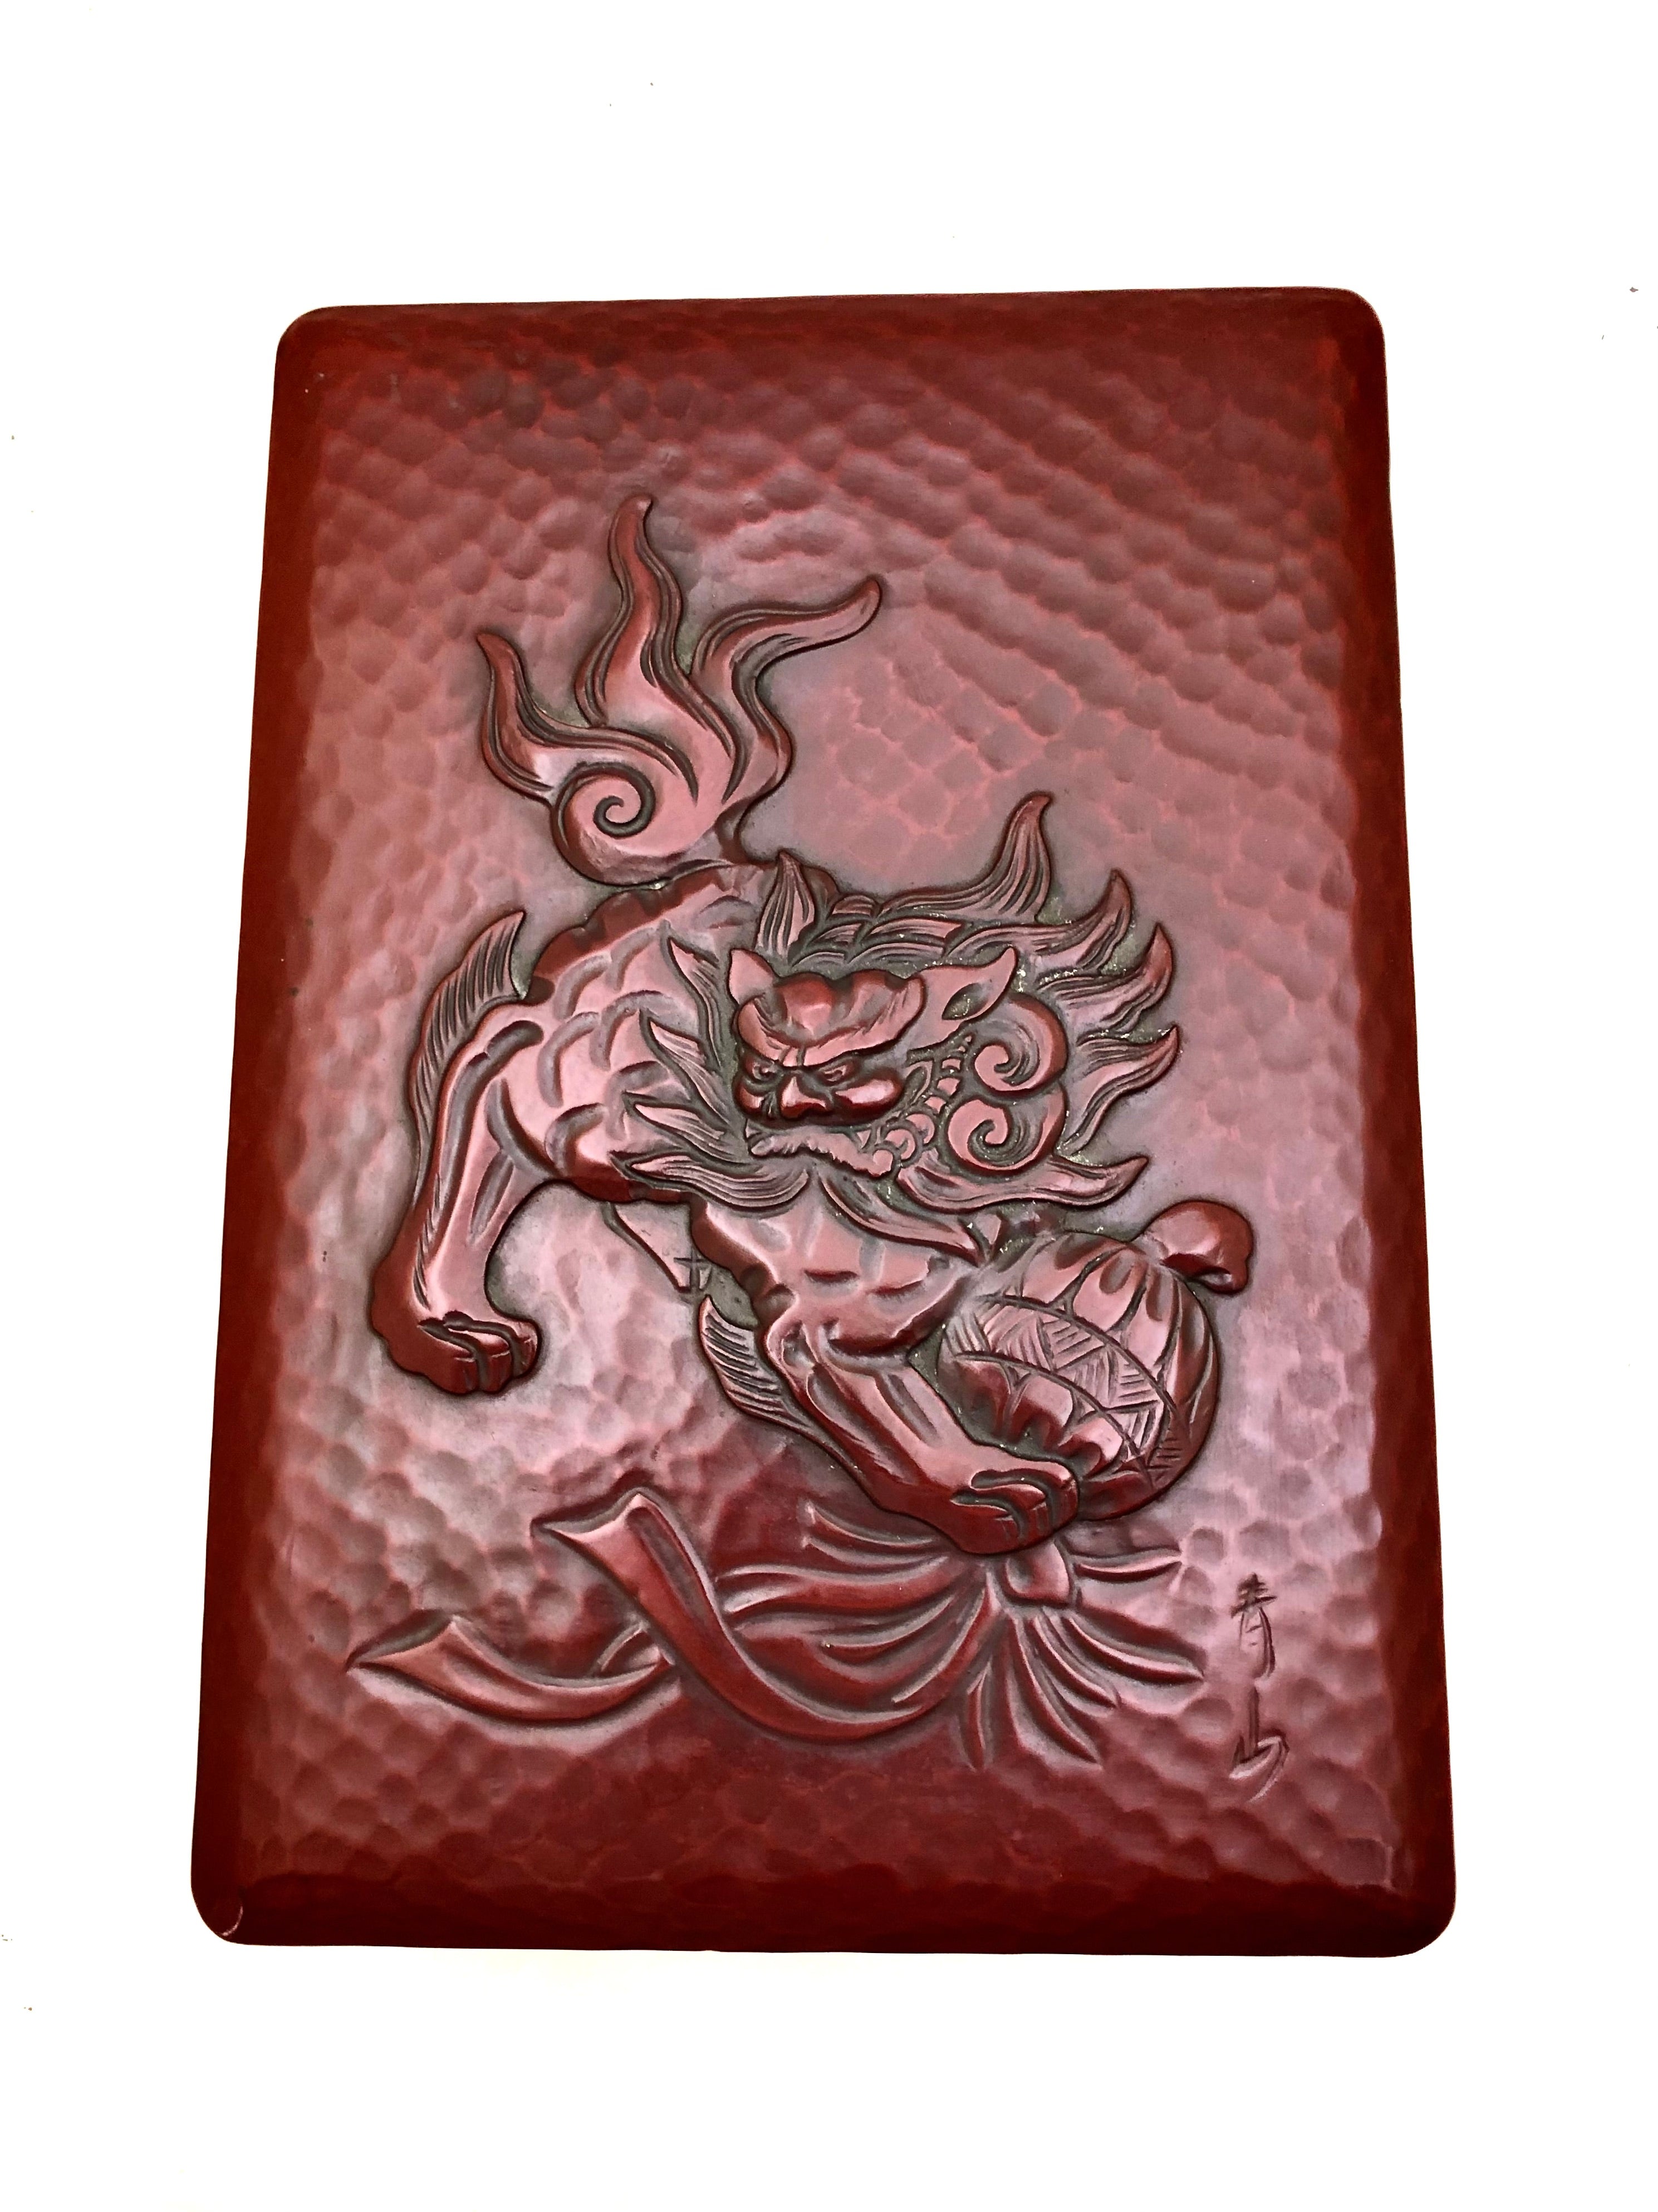 Vintage Japanese Kamakura Lacquer Document Box with  Relief Carving of Lion (Komainu) and Temari Ball